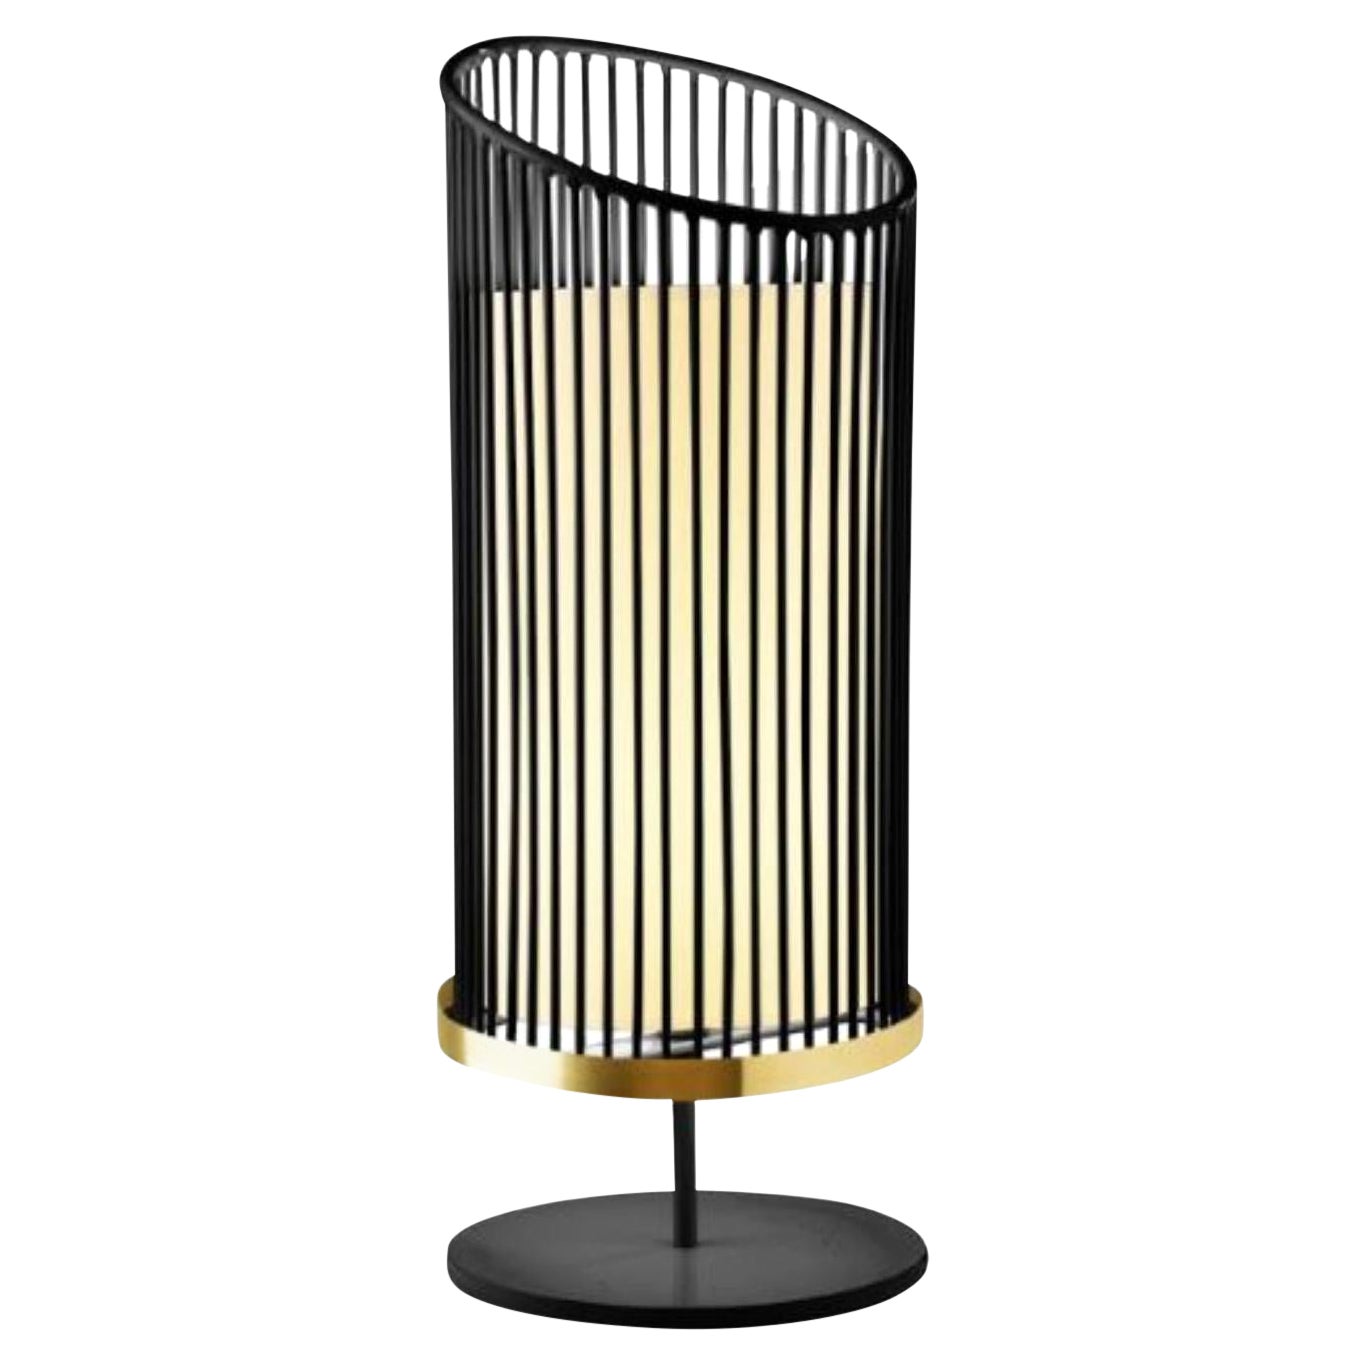 Black New Spider Table Lamp with Brass Ring by Dooq